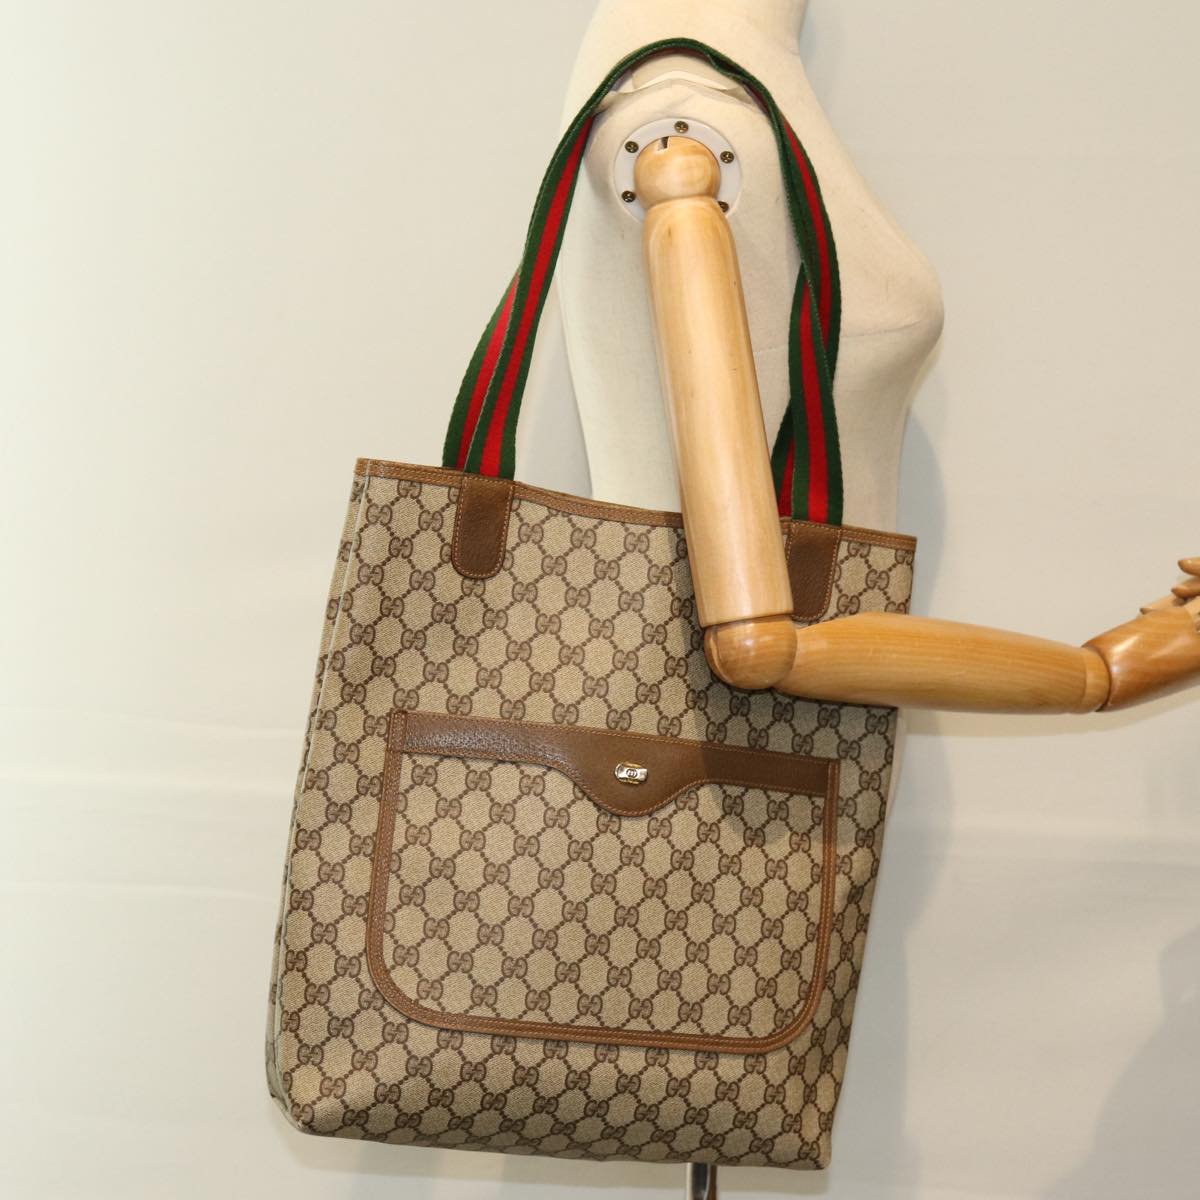 GUCCI GG Supreme Web Sherry Line Tote Bag PVC Beige Red 40 02 003 Auth yk12529